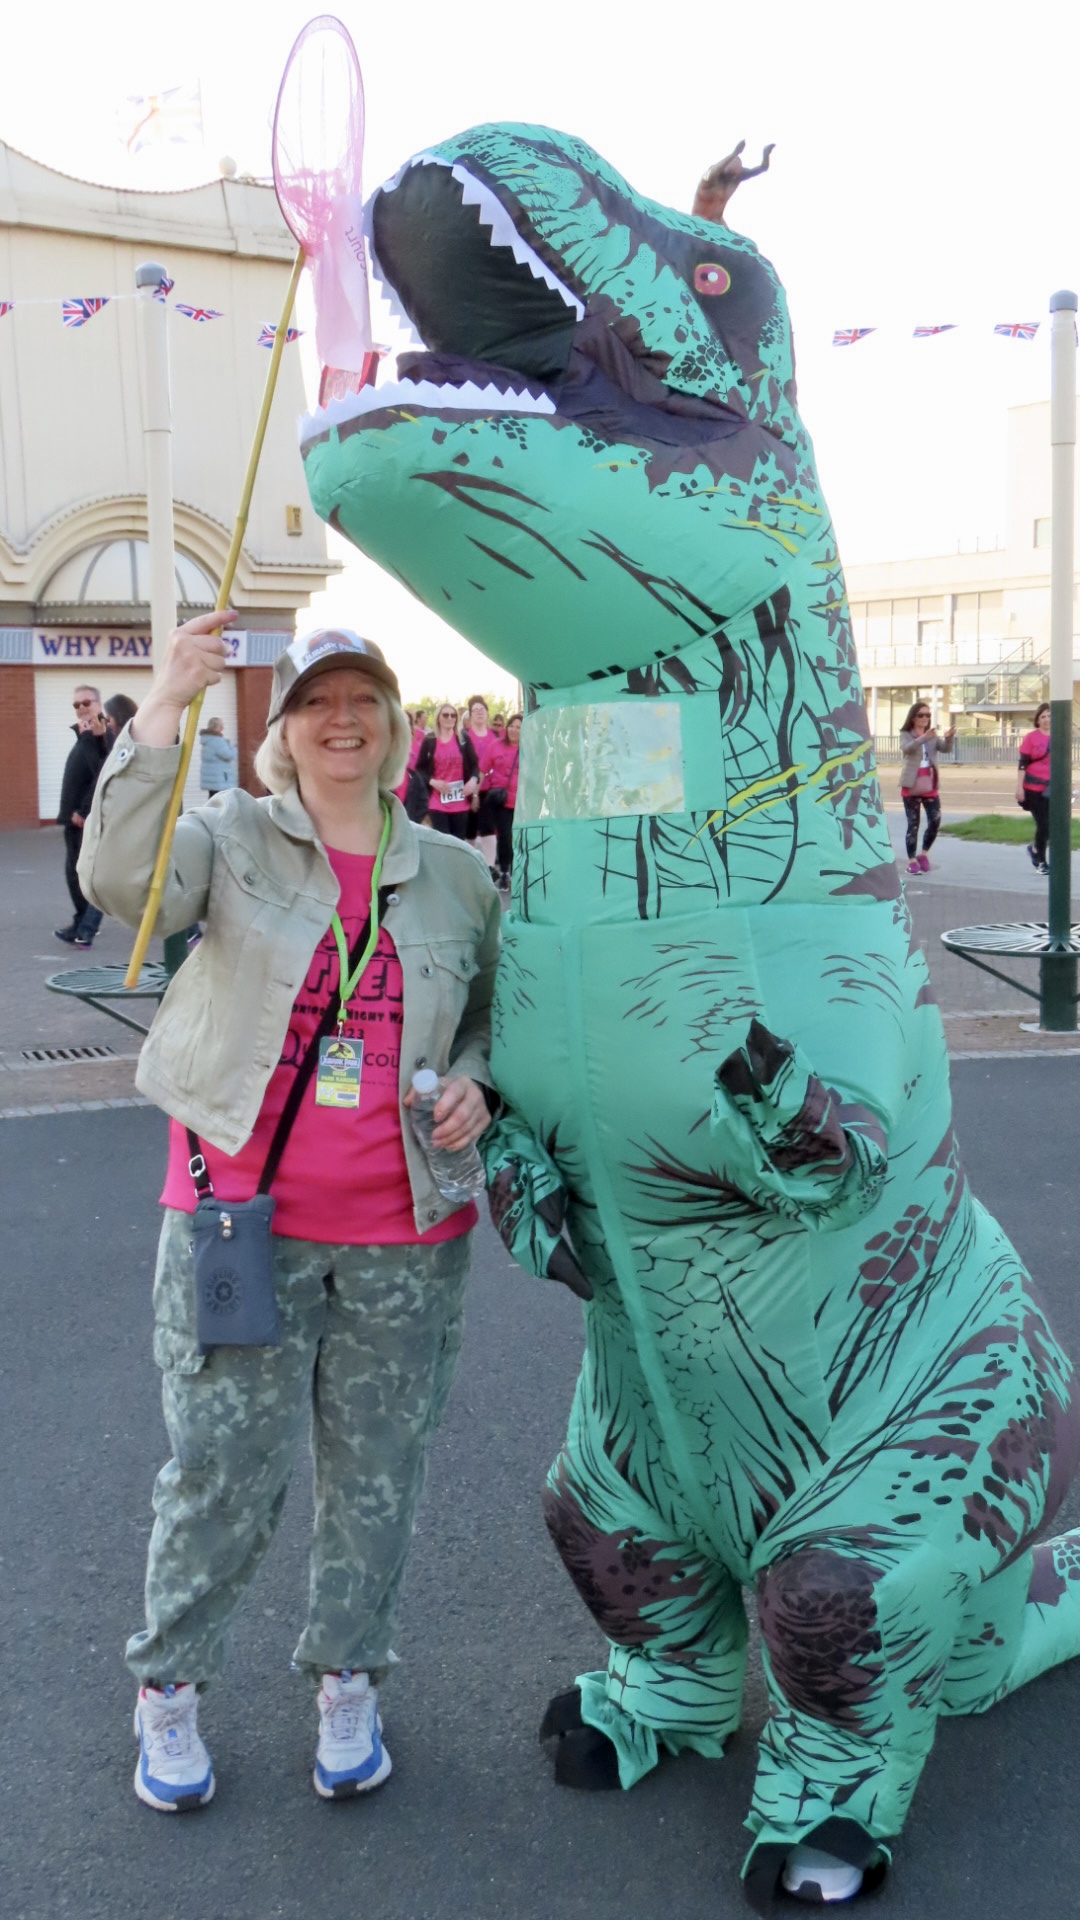 Joanne Caddy and Amanda Bradley were inspired by Jurassic Park to raise funds for Queenscourt Hospice by walking 10 kilometres through the streets of Southport - dressed as an 8ft tall Tyrannosaurus Rex dinosaur and a Jurassic Park Ranger! Photo by Andrew Brown of Stand Up For Southport